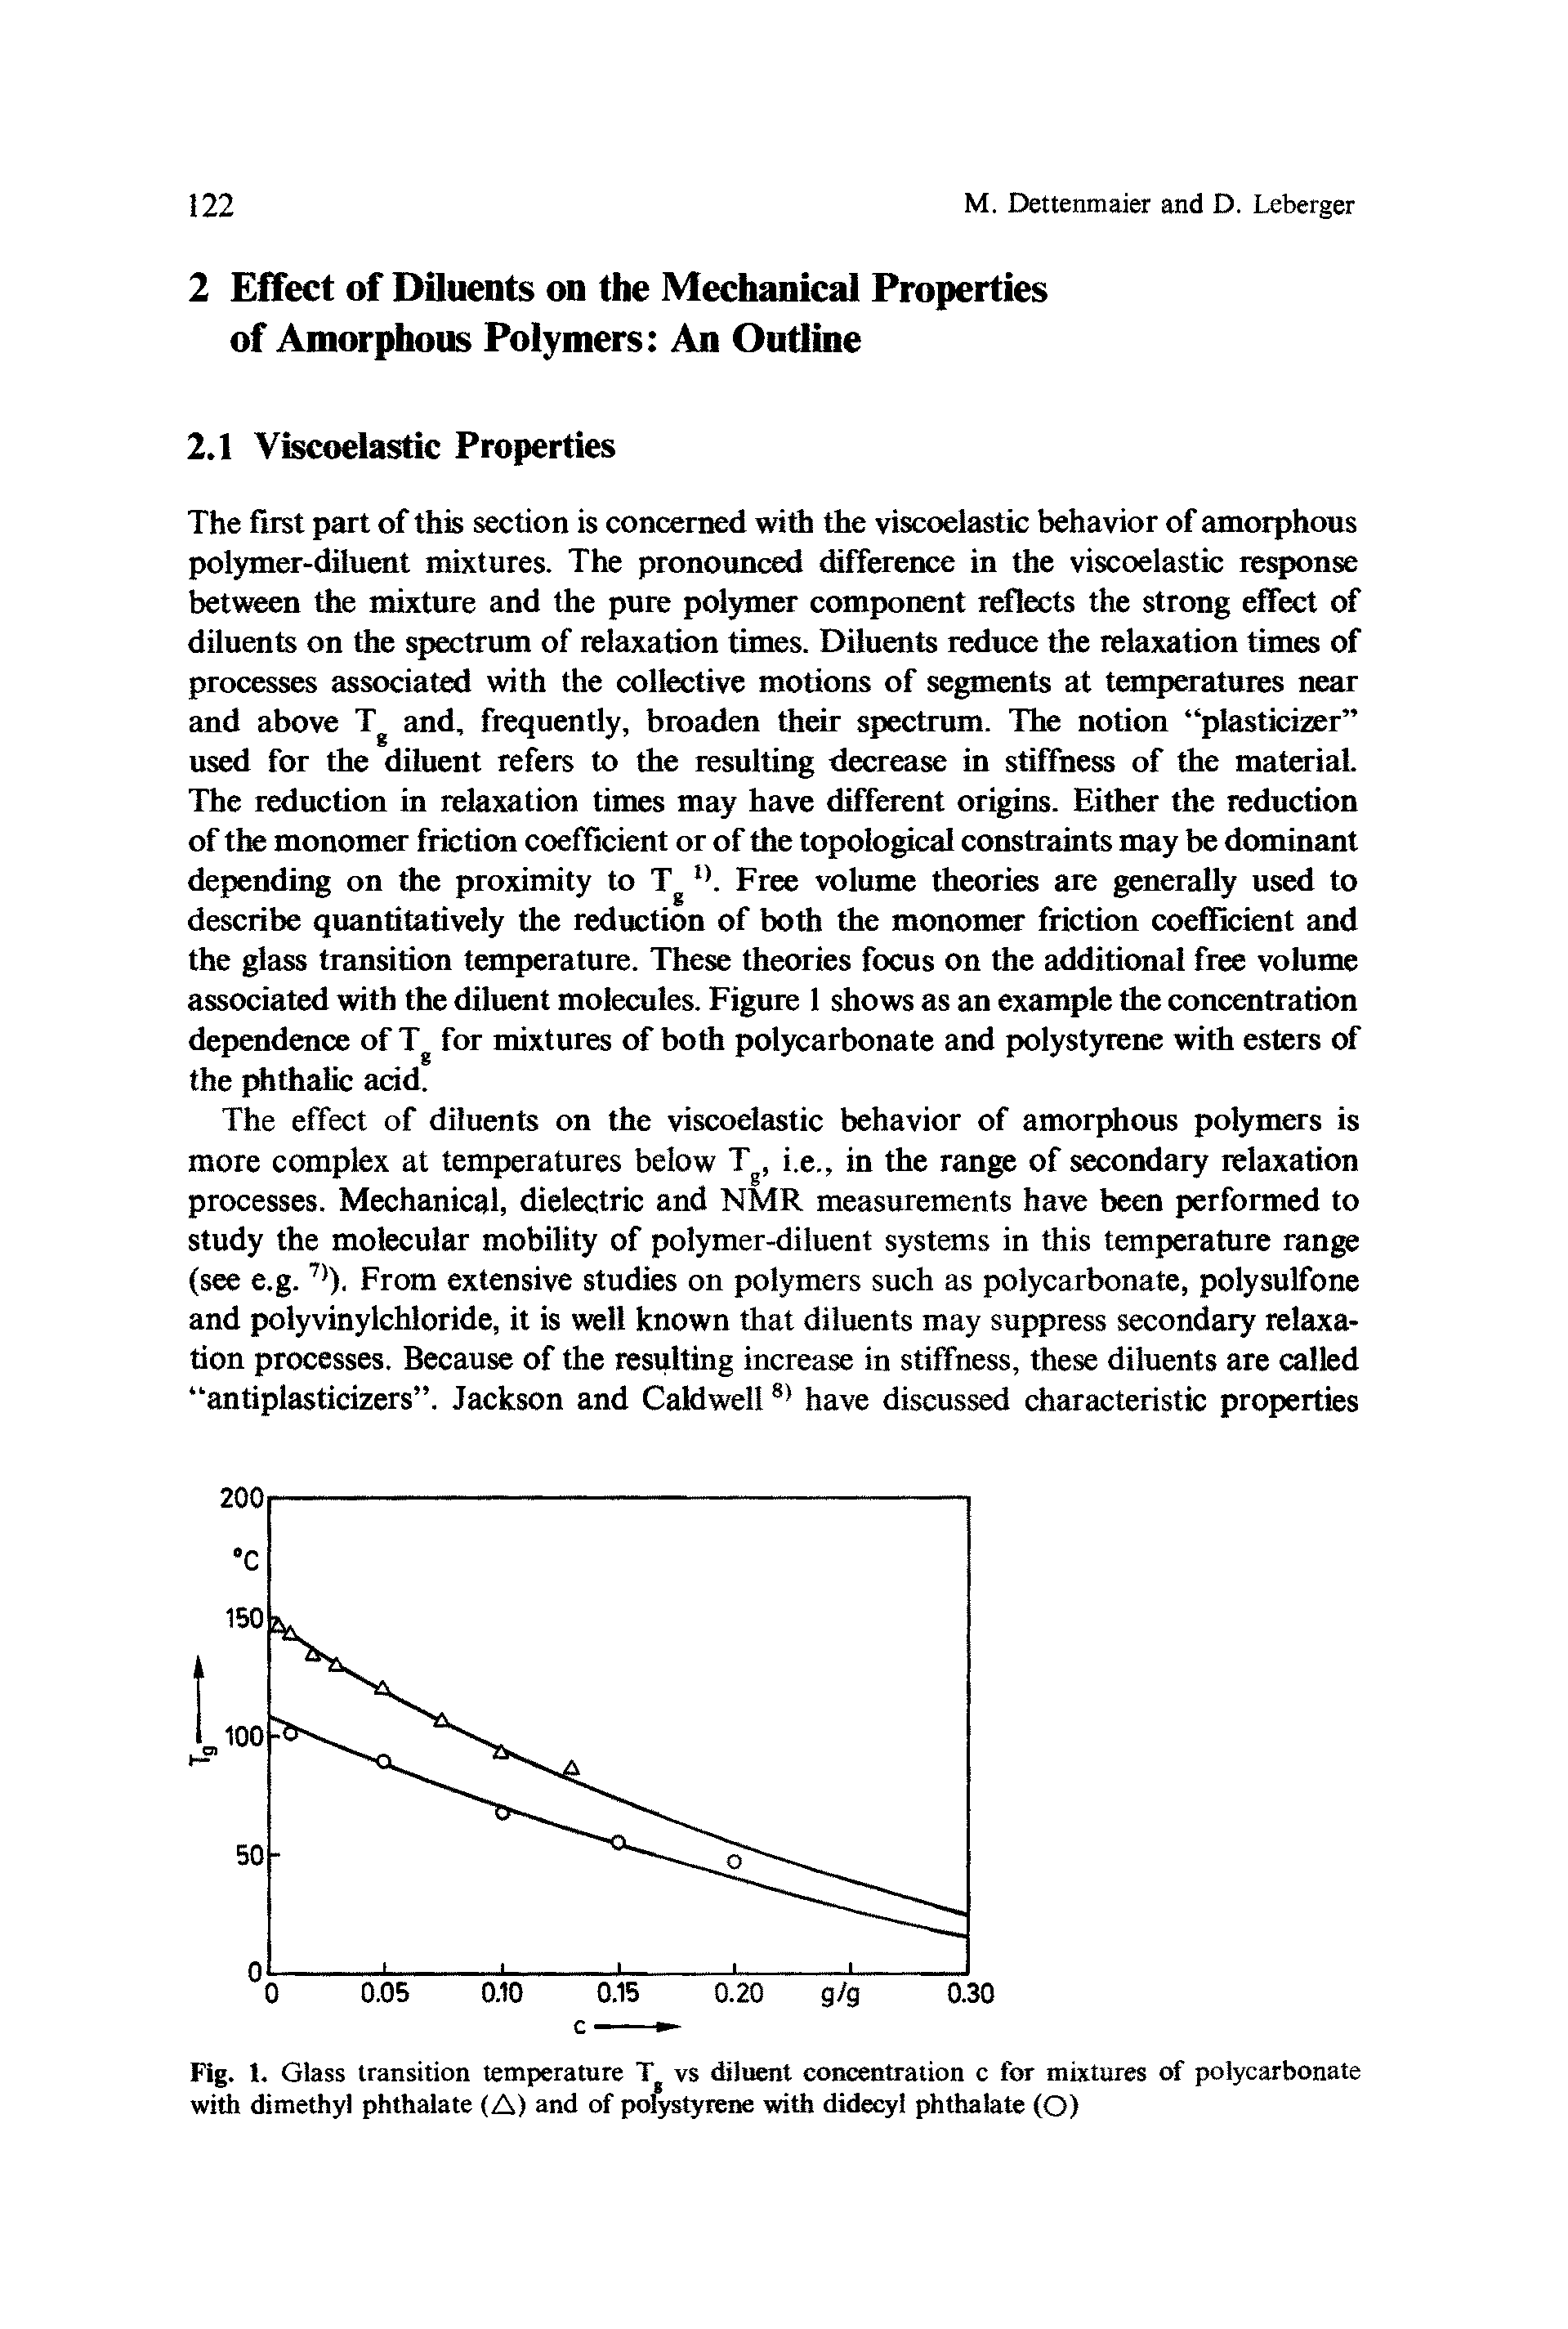 Fig. 1. Glass transition temperature T vs diluent concentration c for mixtures of polycarbonate with dimethyl phthalate (A) and of po tyrene with didecyl phthalate (O)...